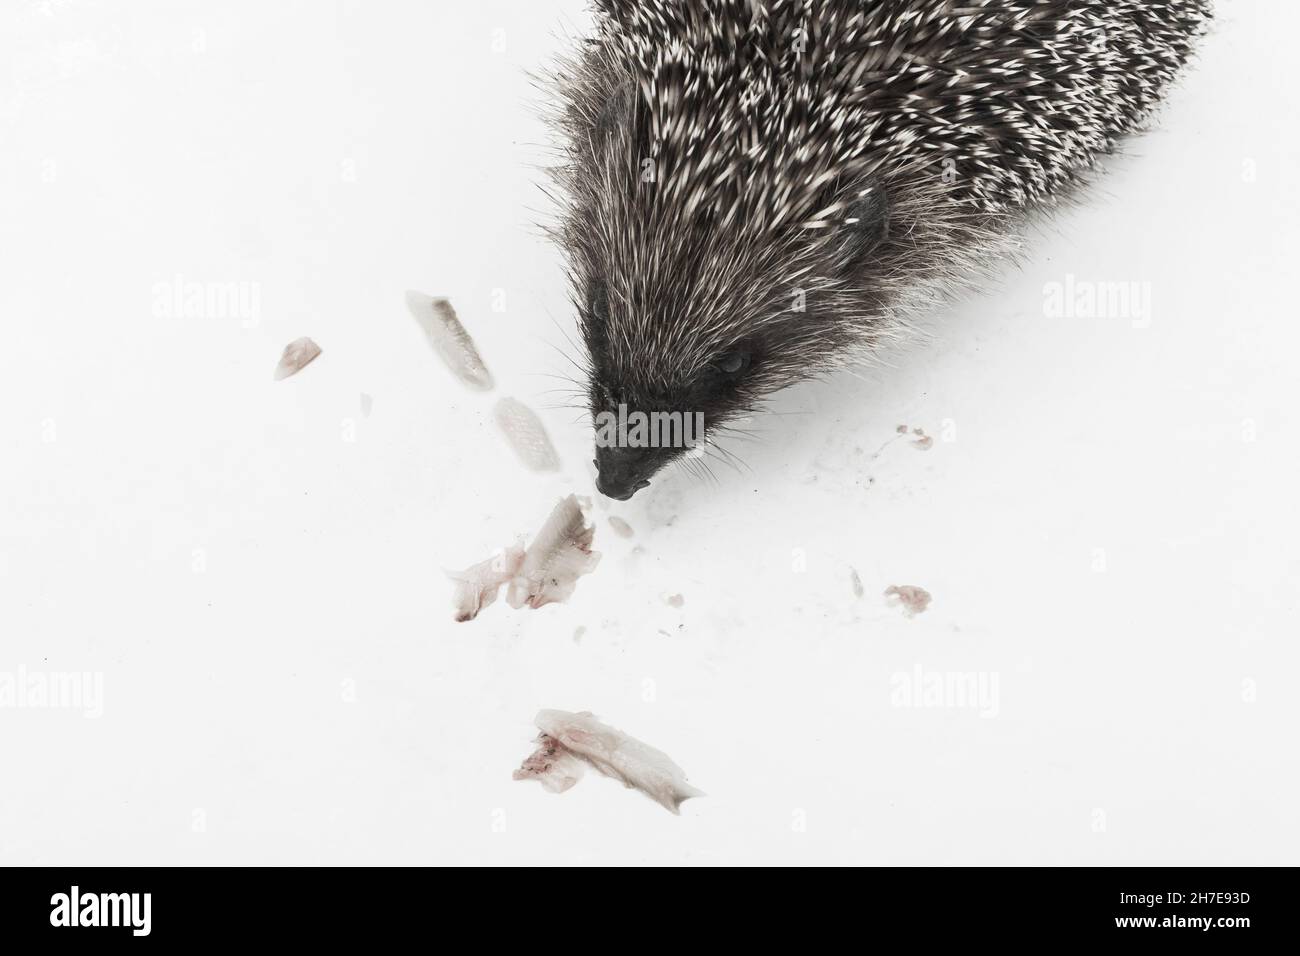 Hedgehog prickly animal of wild nature mammal eats fish on a white background. Stock Photo